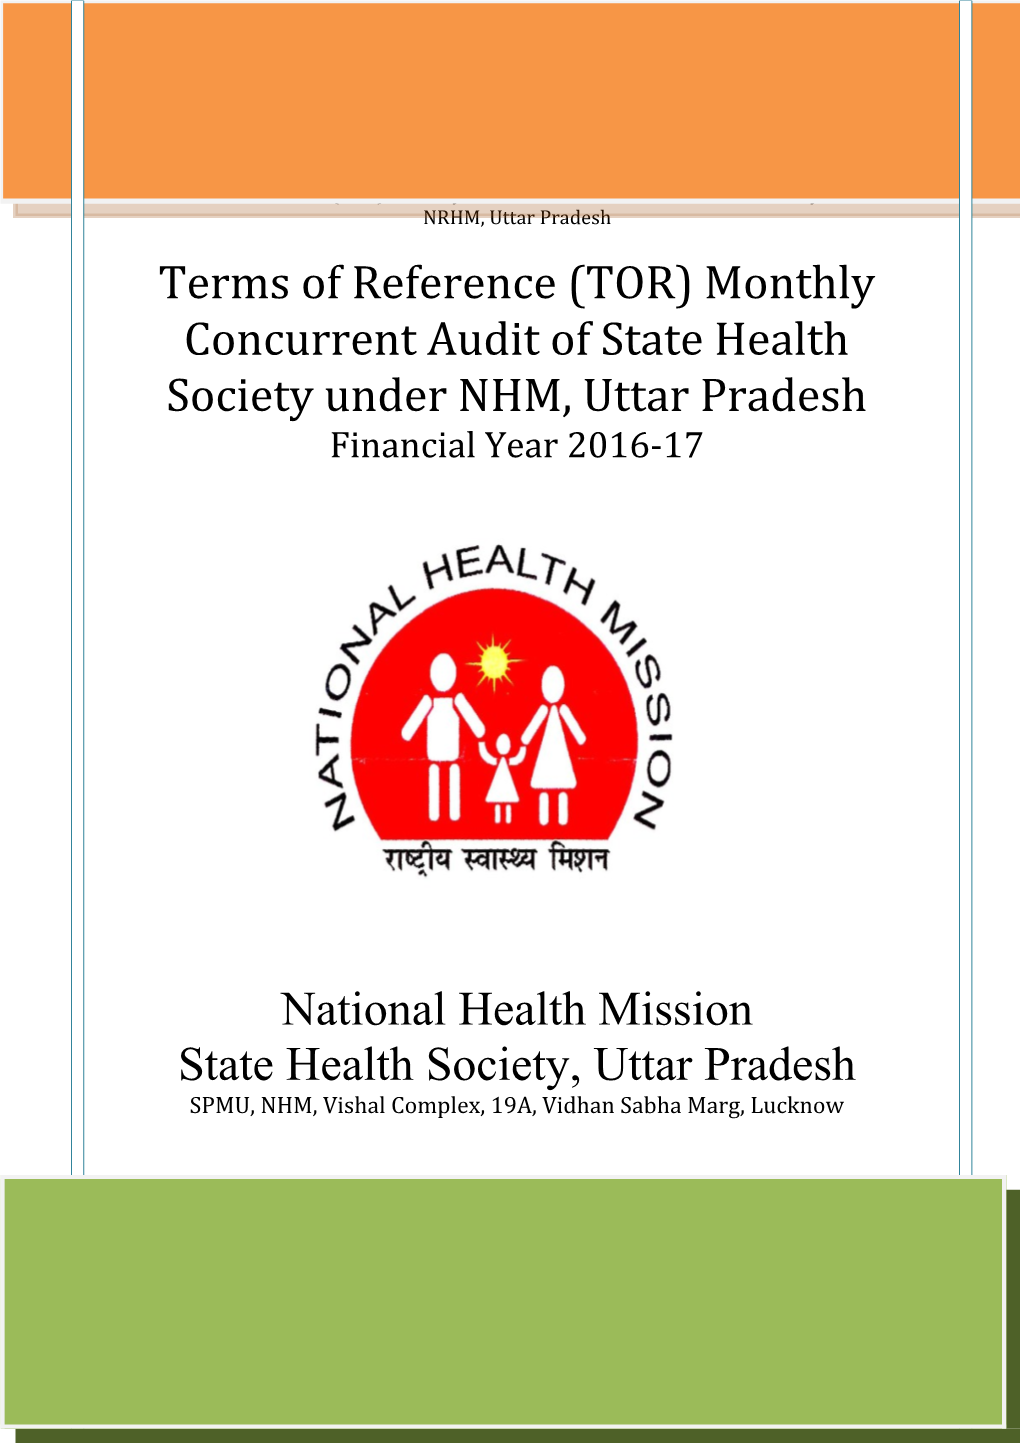 Terms of Reference (TOR) Monthly Concurrent Audit of District Health Society Under NRHM